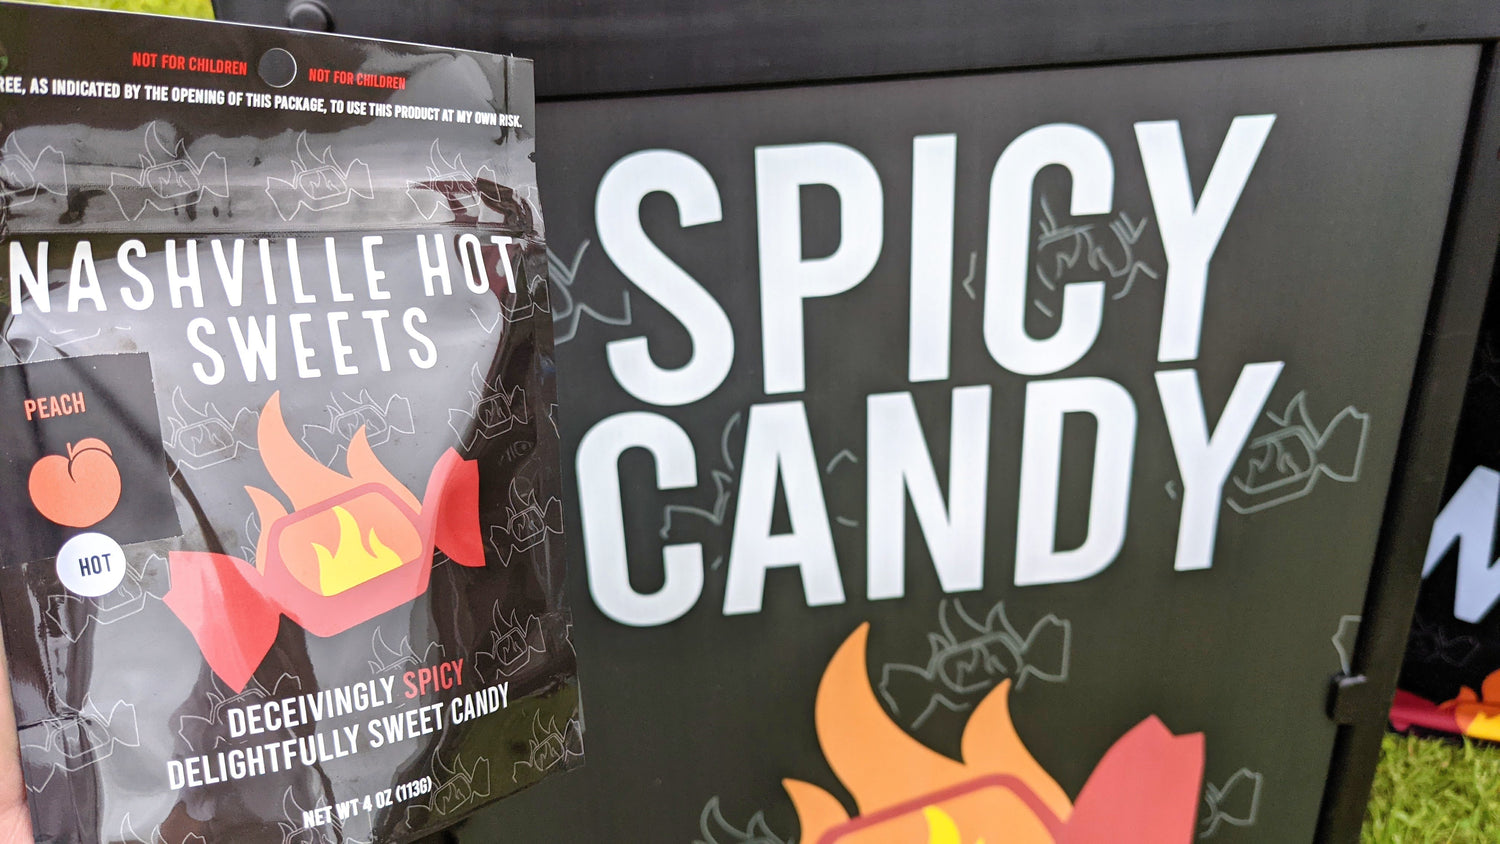 Spicy Candy, Hot Candy, Nashville Hot Sweets